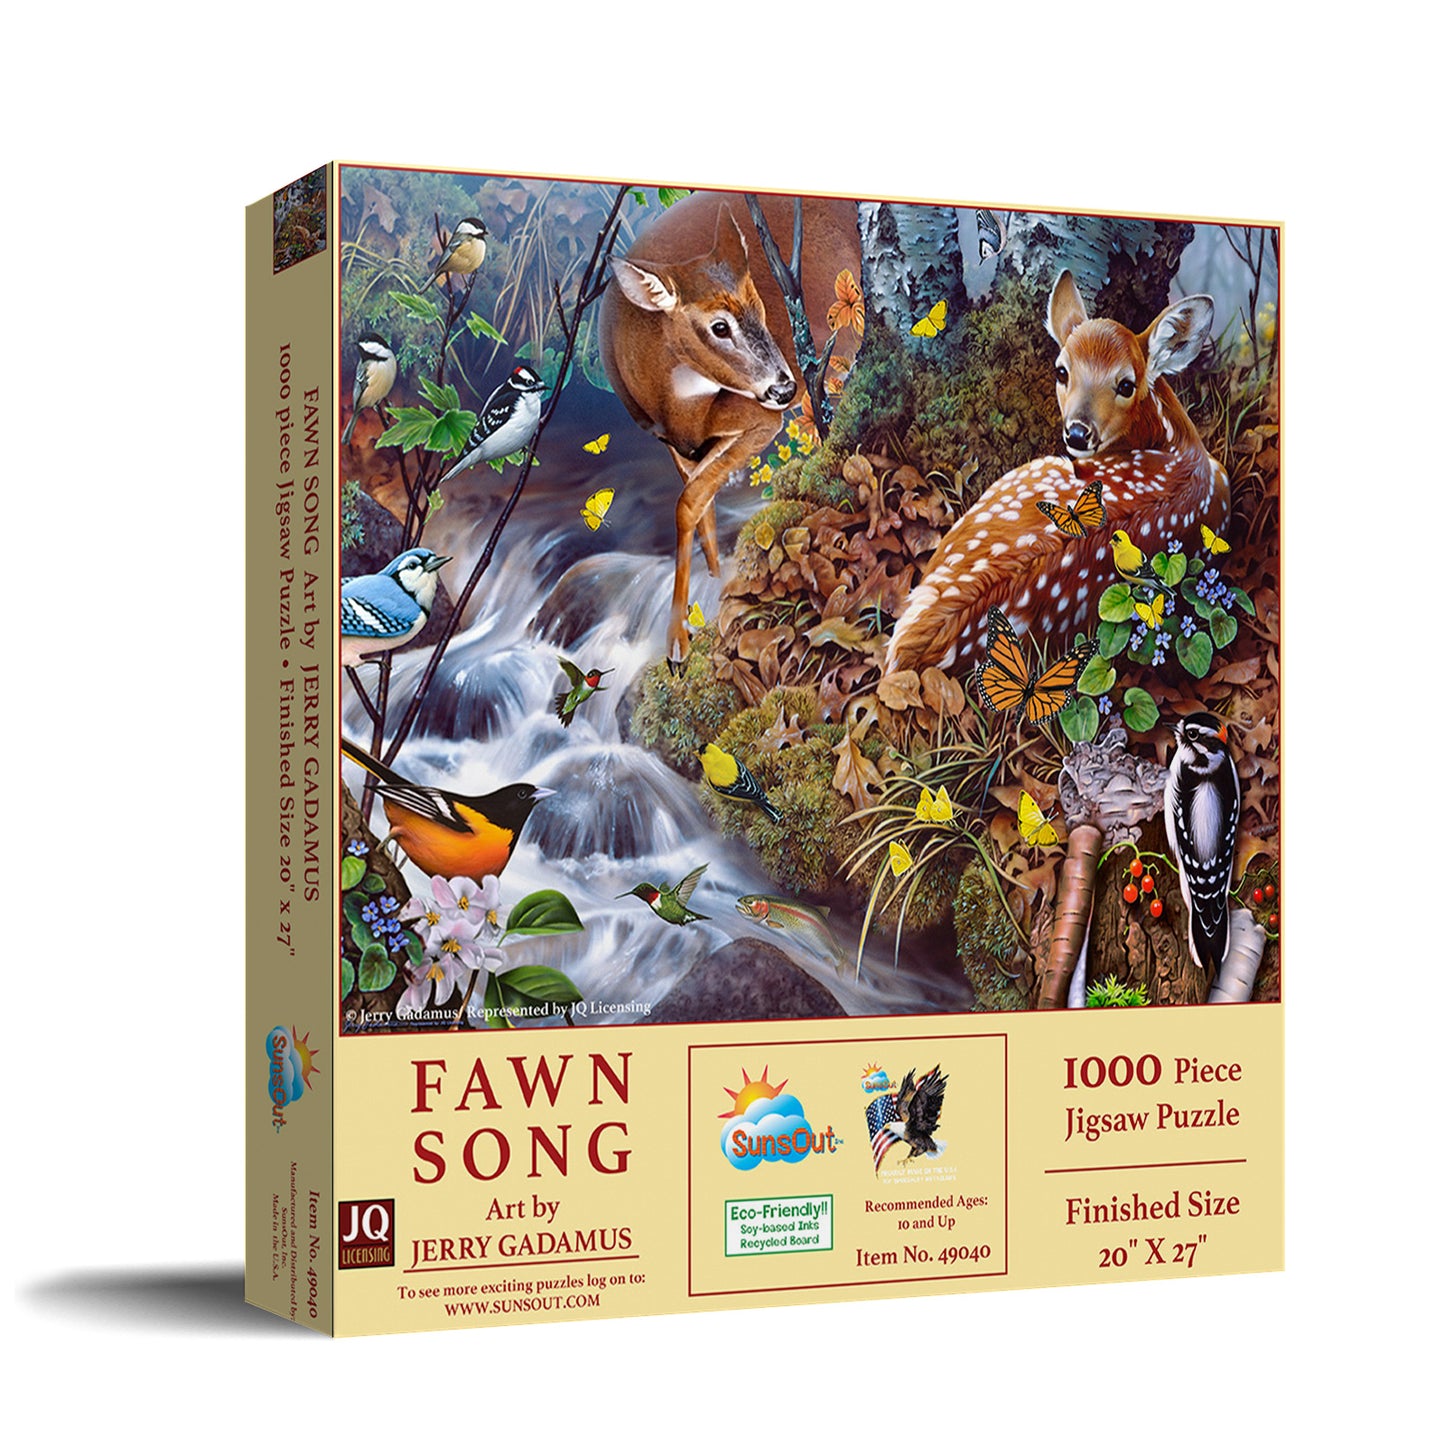 Fawn Song - 1000 Piece Jigsaw Puzzle